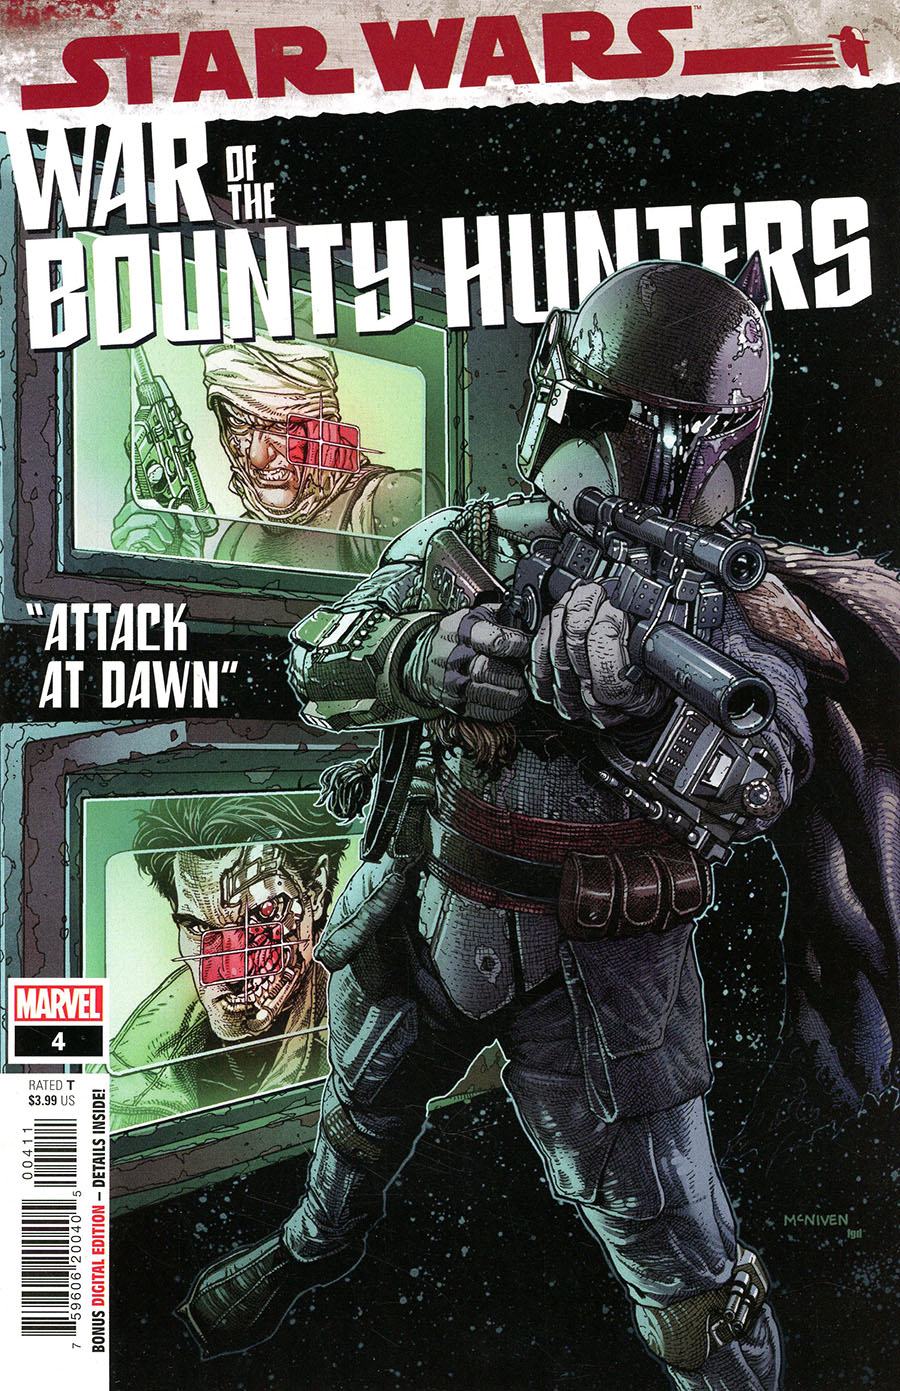 Star Wars War Of The Bounty Hunters #4 Cover A Regular Steve McNiven Cover